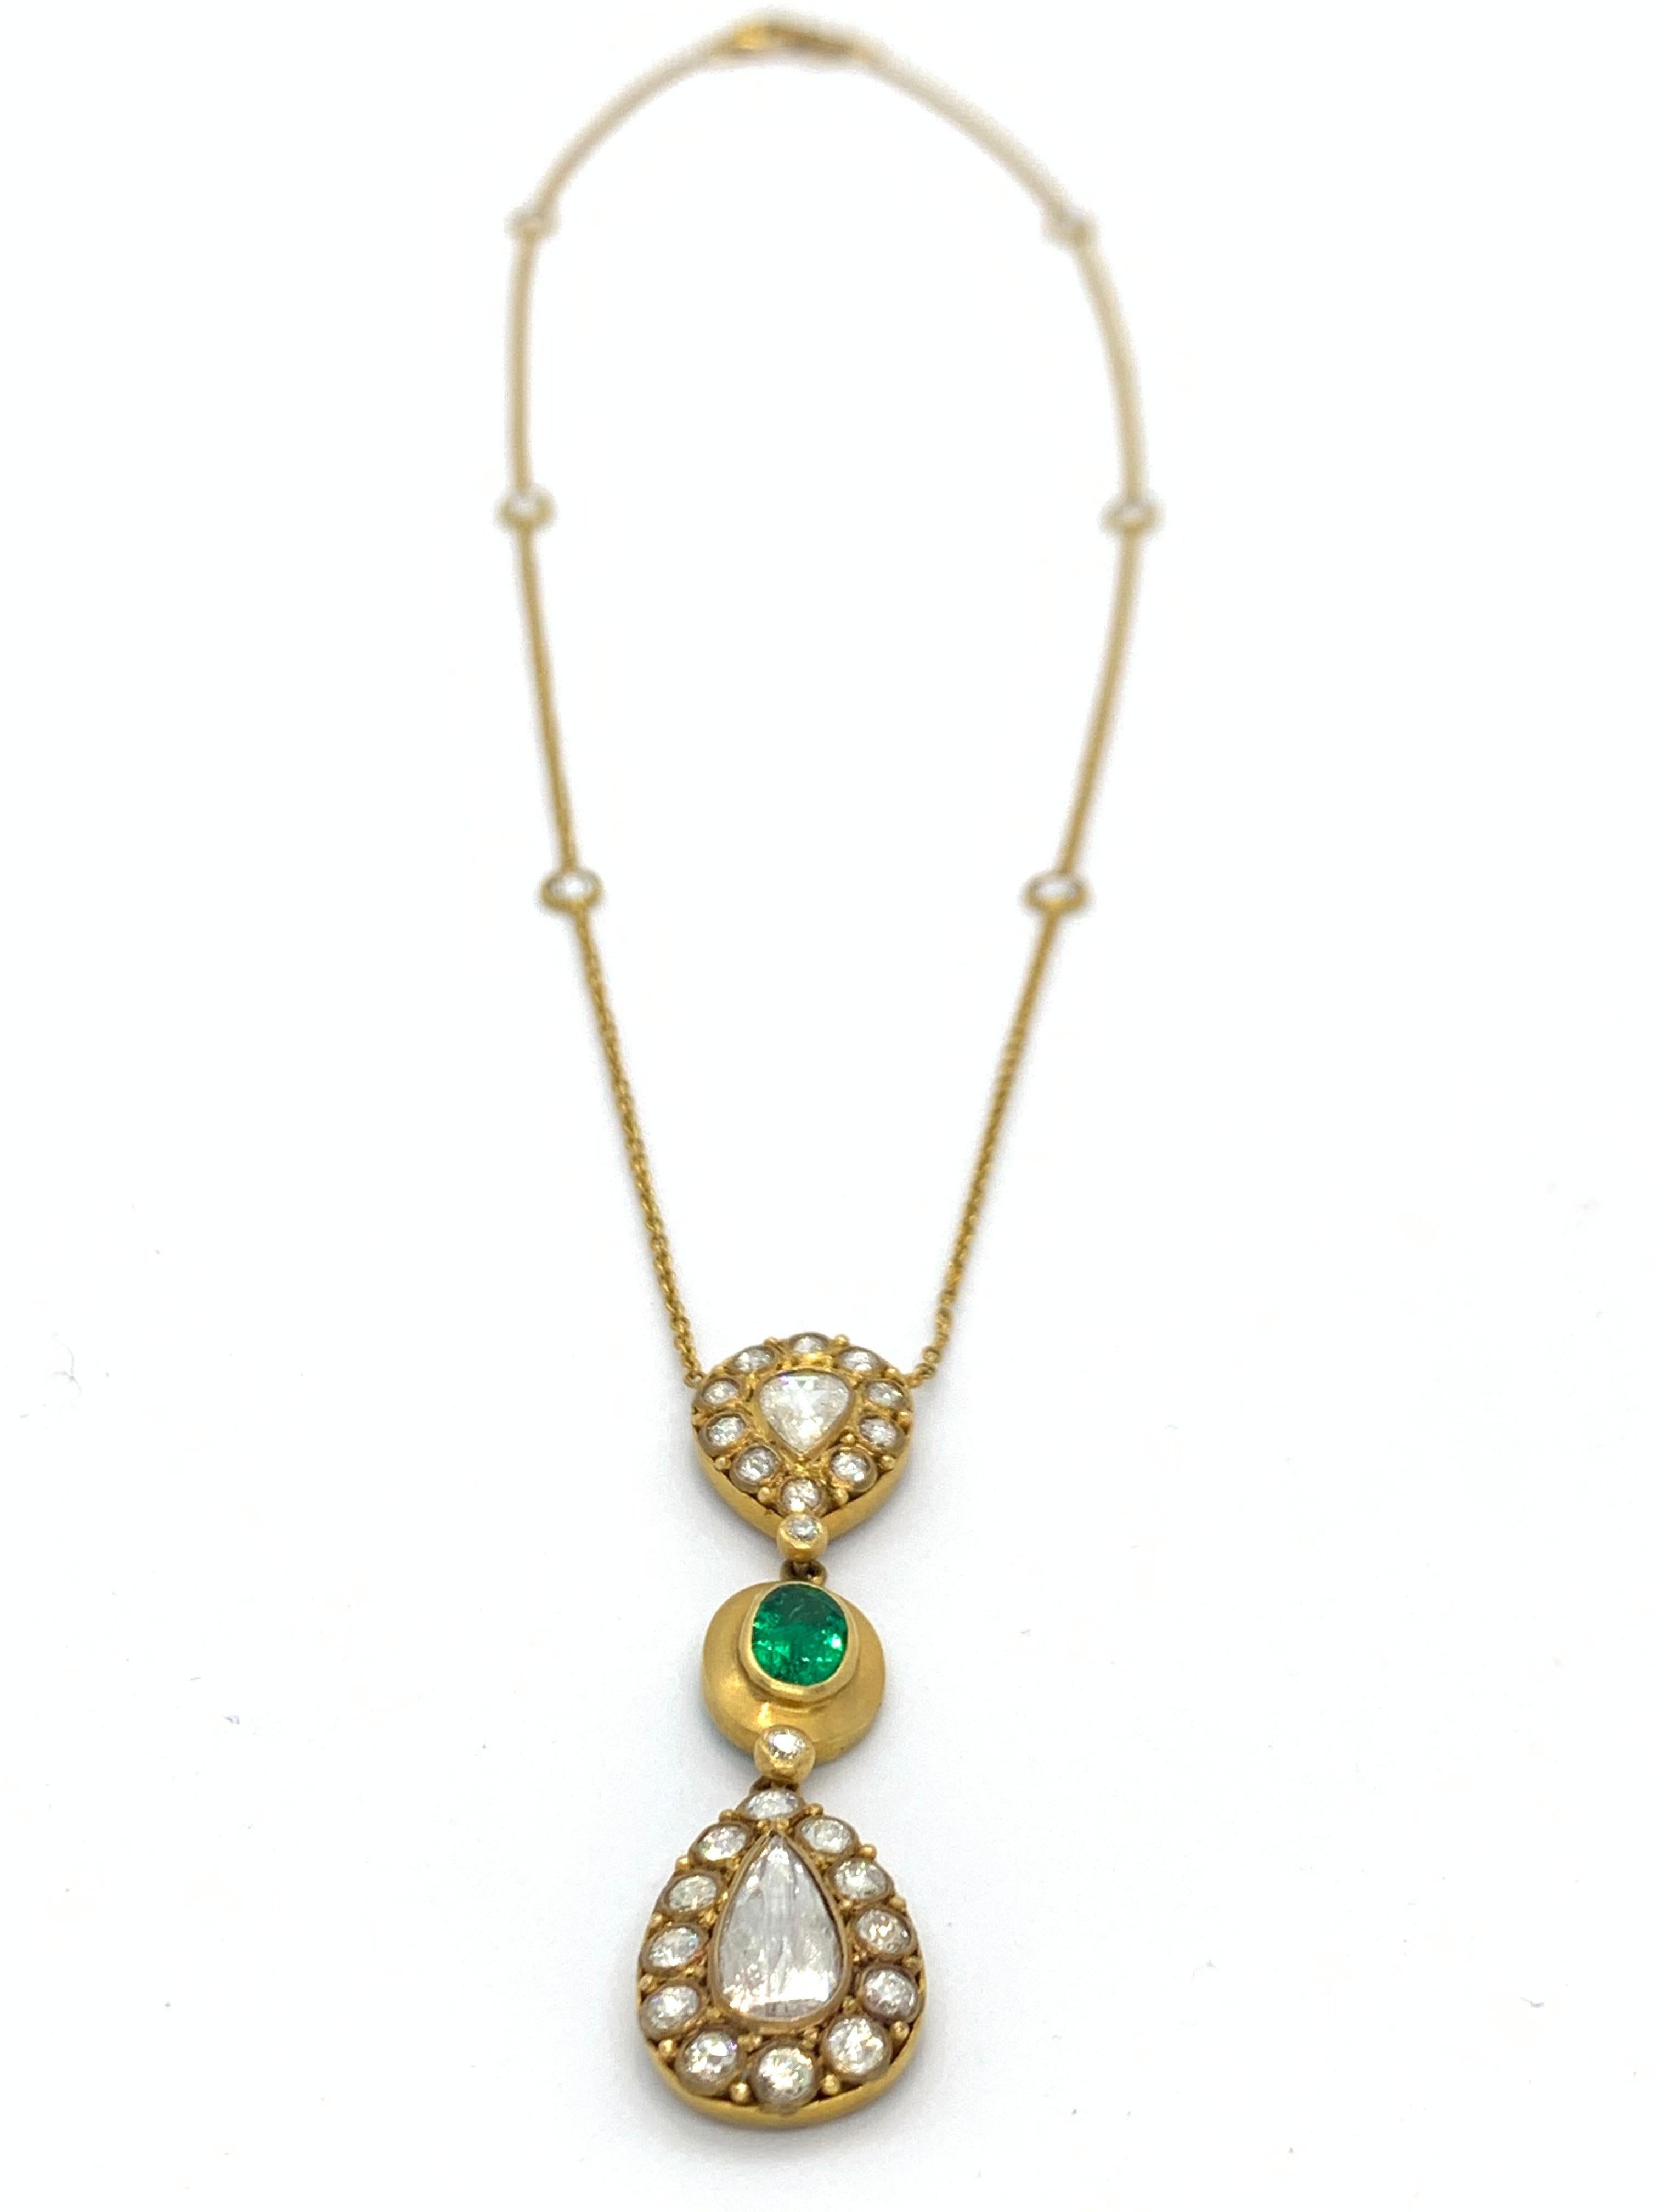 Necklace with 2.28 Carats Diamonds and Emeralds Handcrafted in 18k Gold For Sale 2